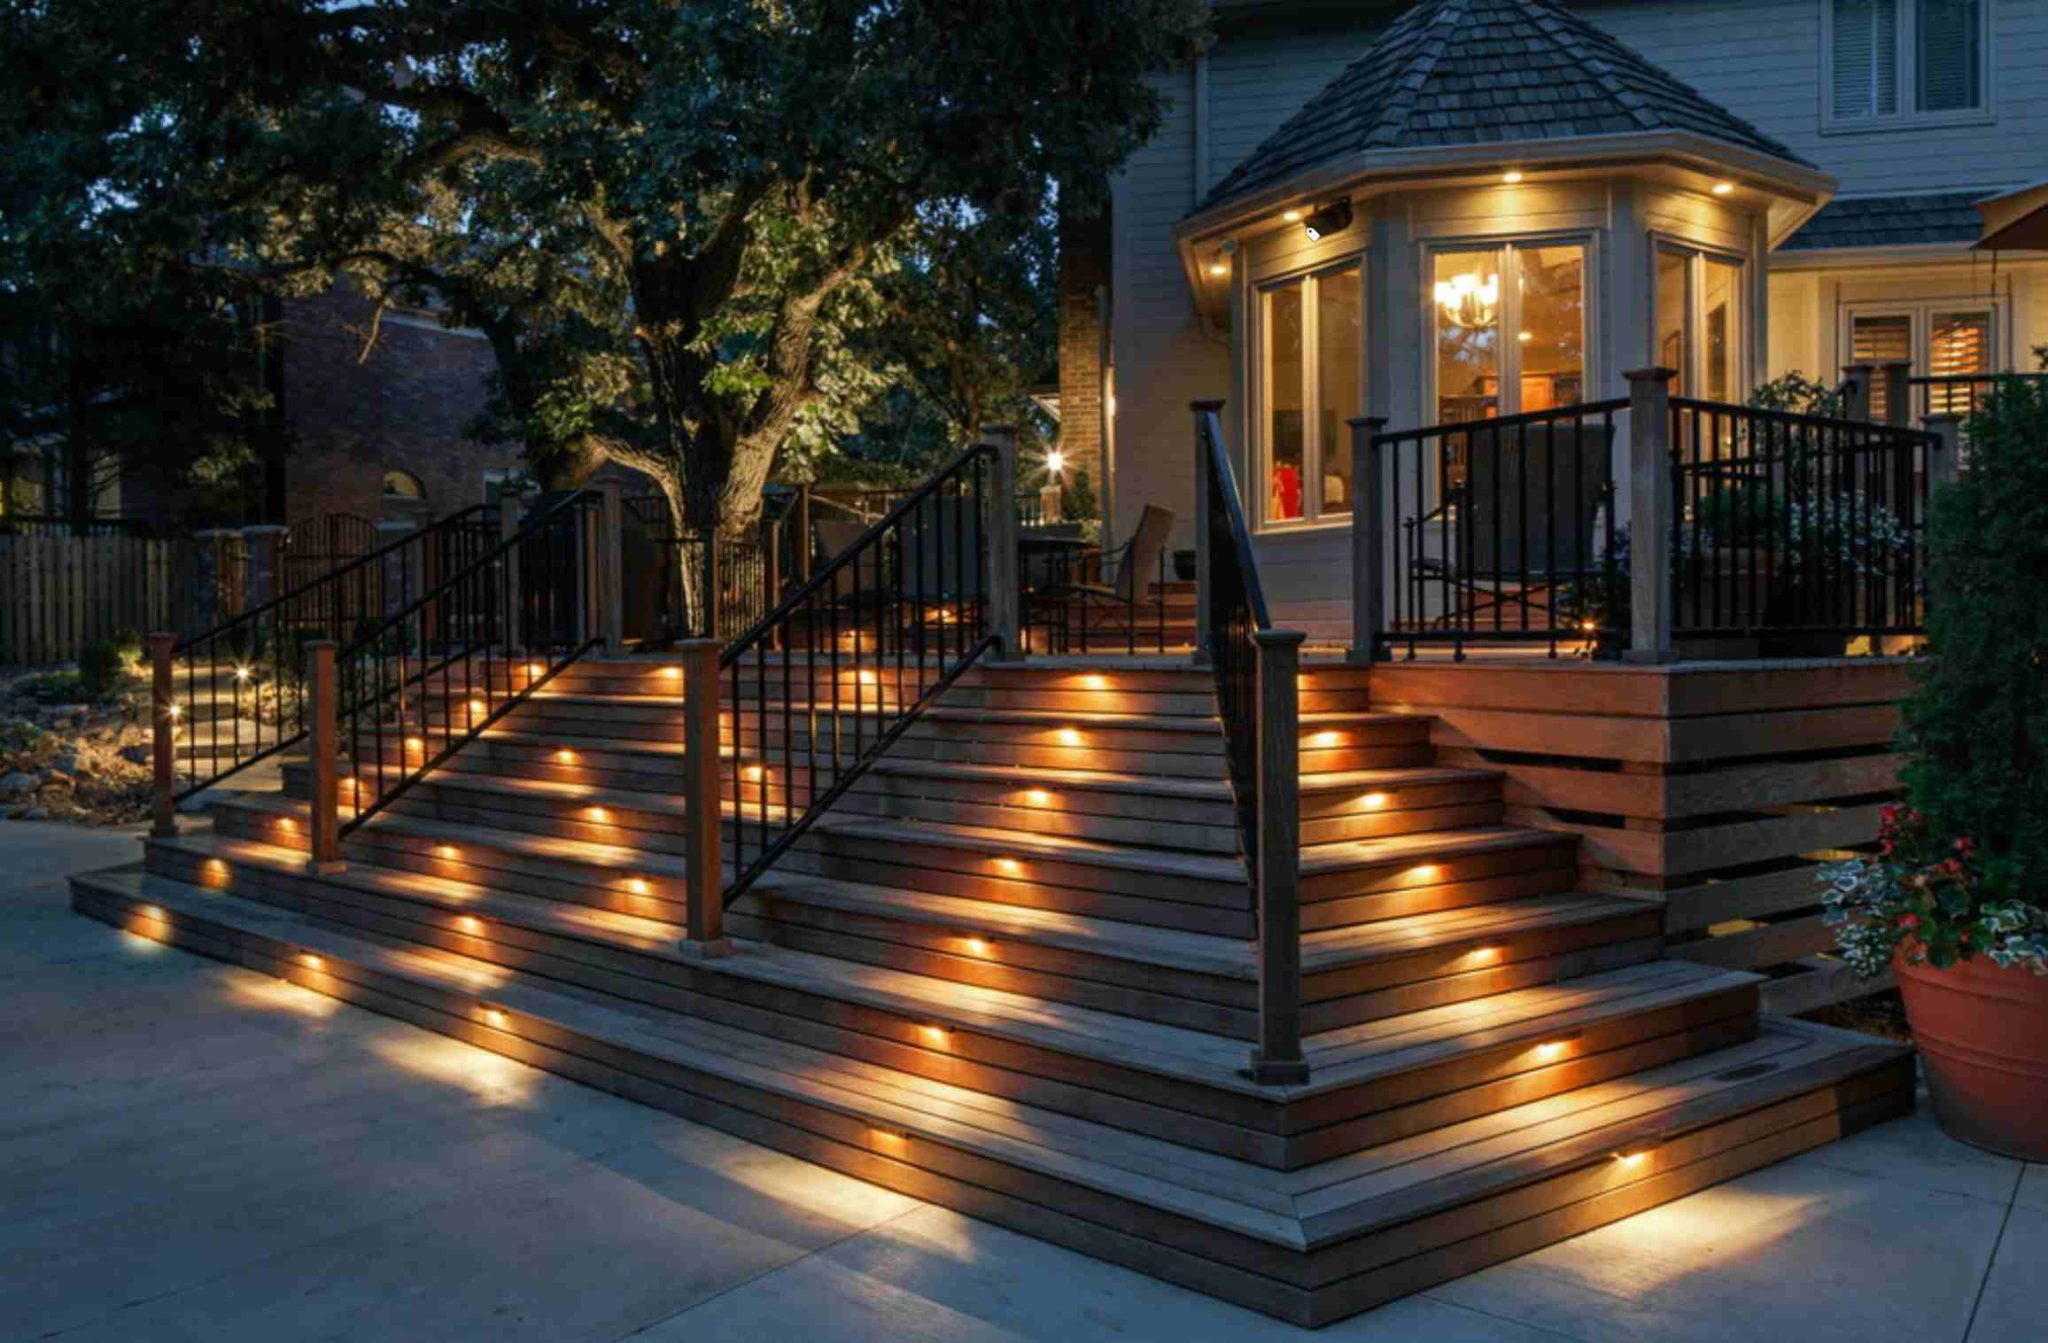 Staircase lighting in outdoor space